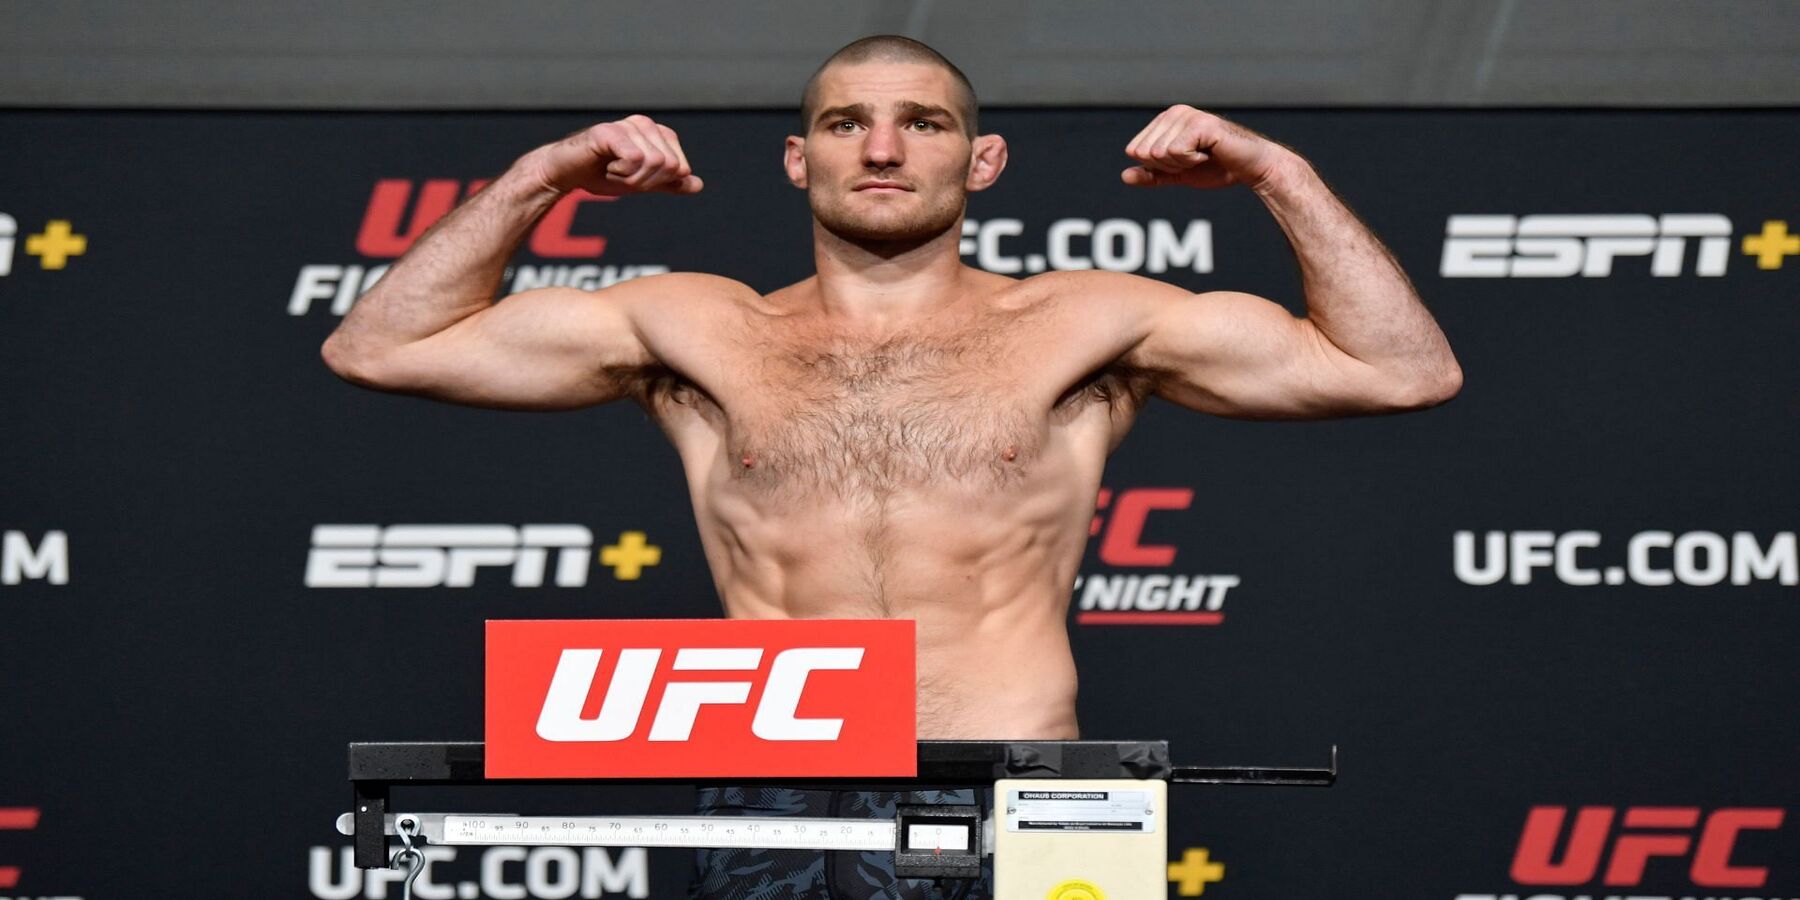 “It’s ok to seek help”: Sean Strickland’s teammate advocates therapy after UFC star rejects girlfriends’ helpful advice